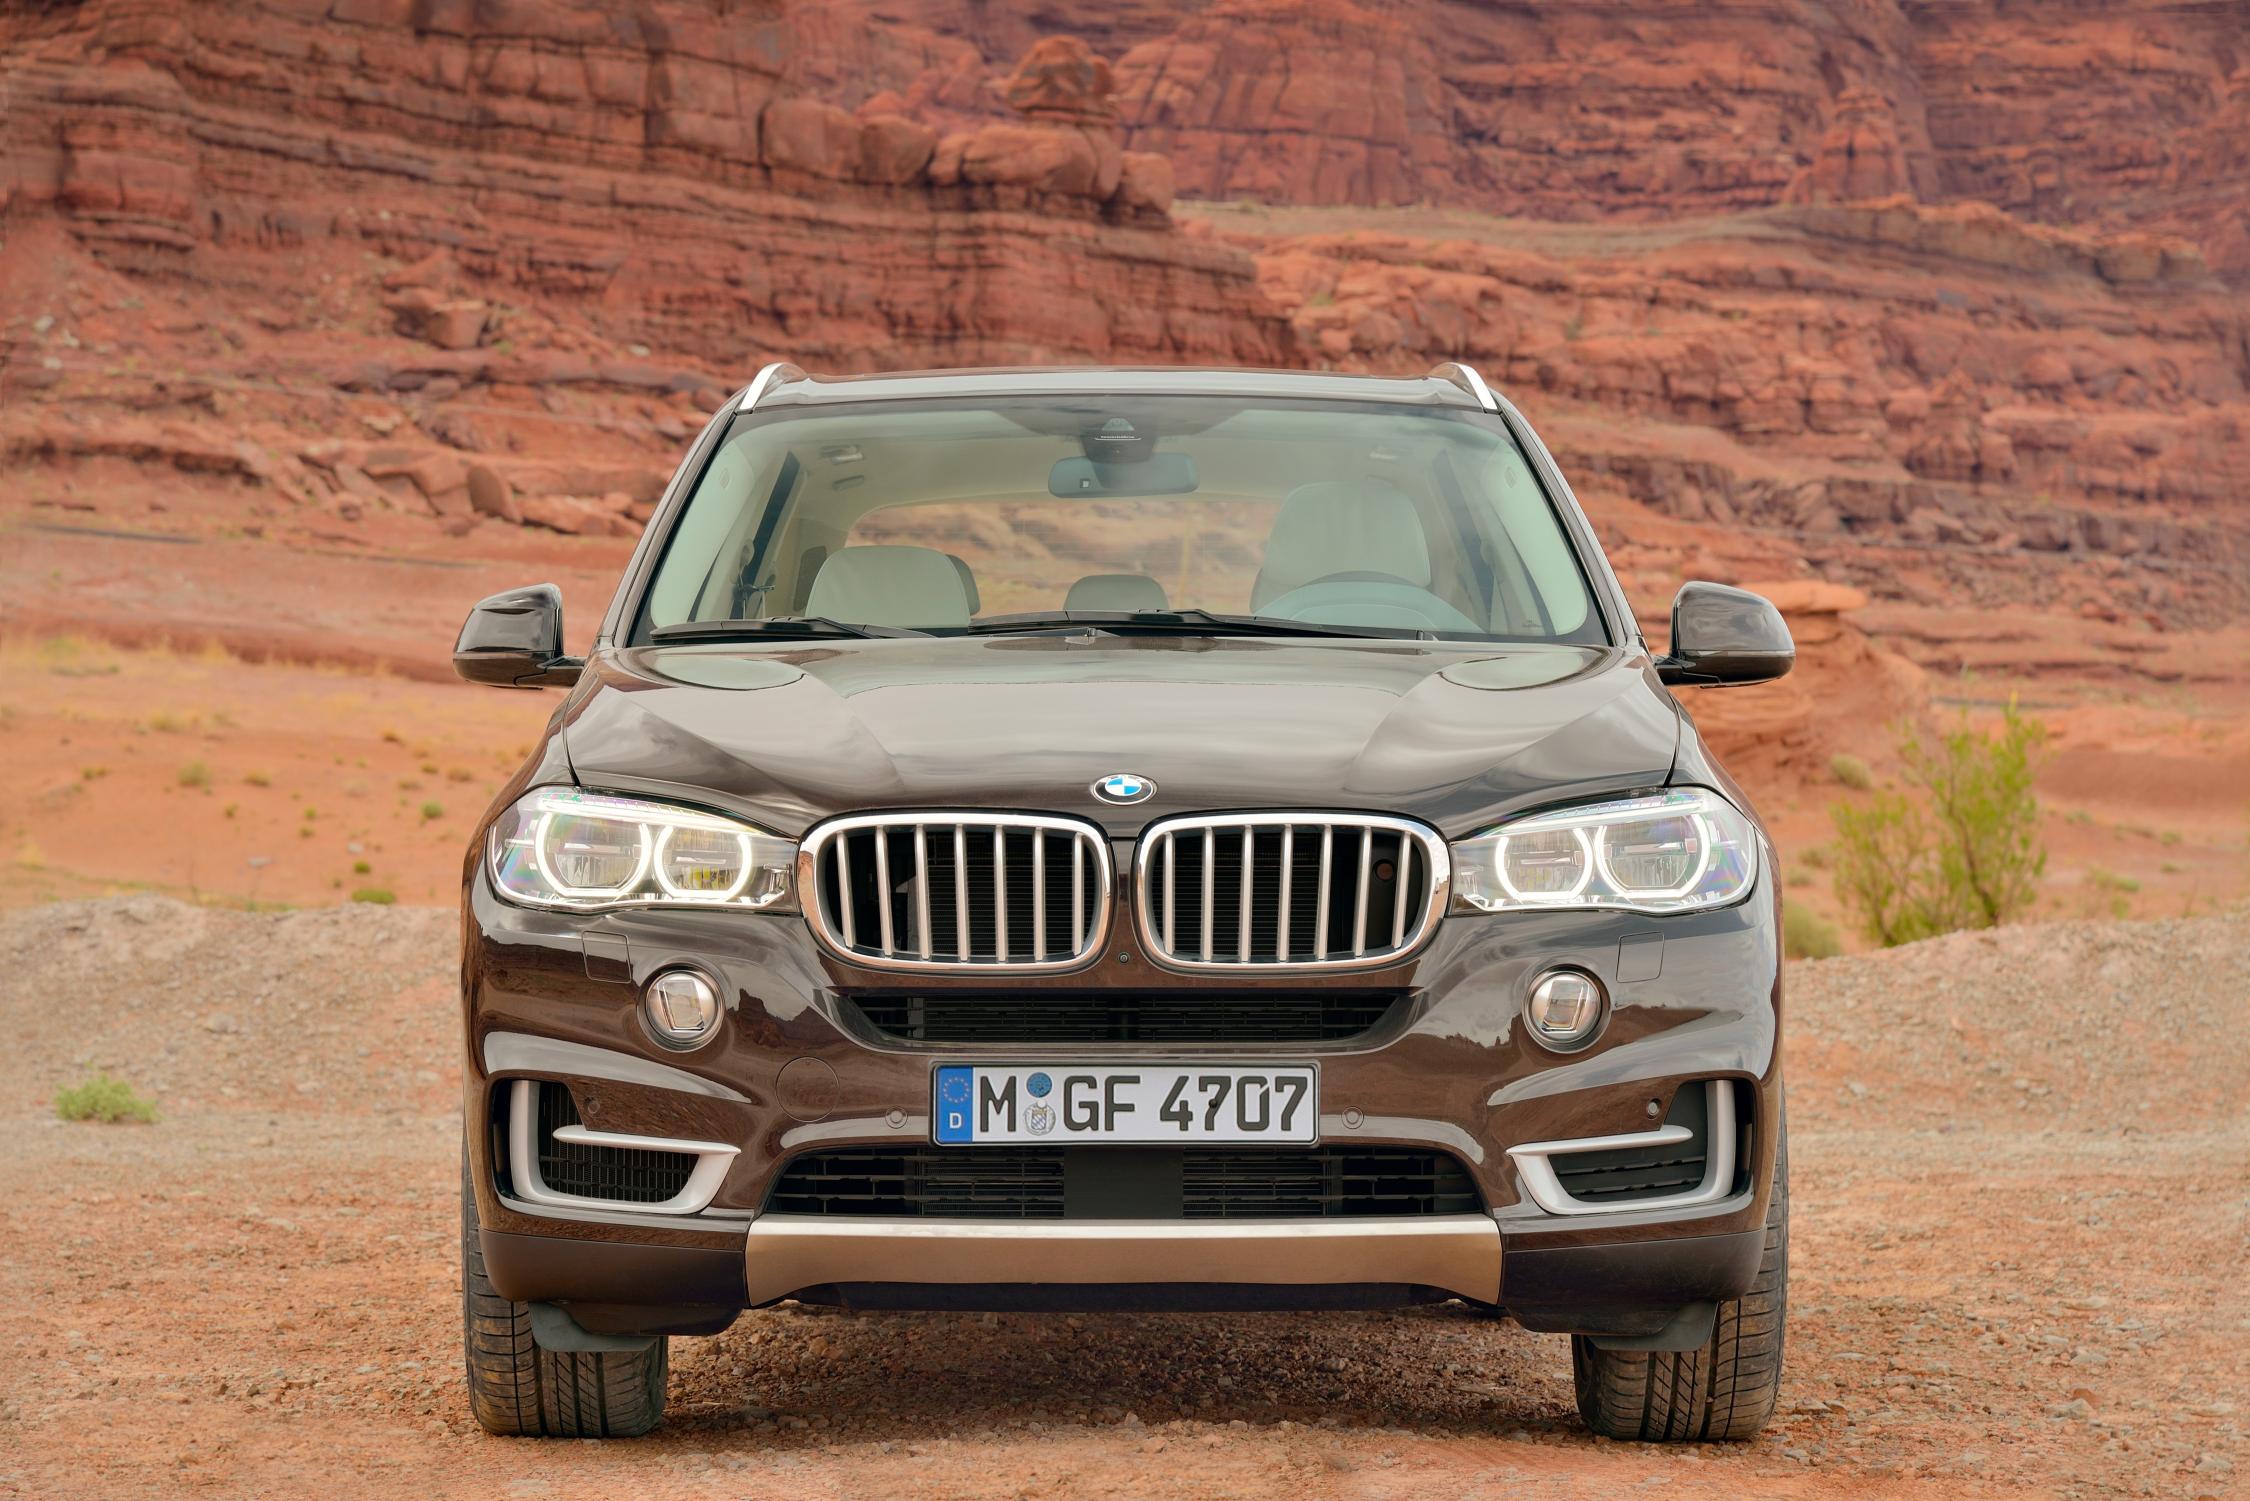 New 2015 BMW X5 front profile